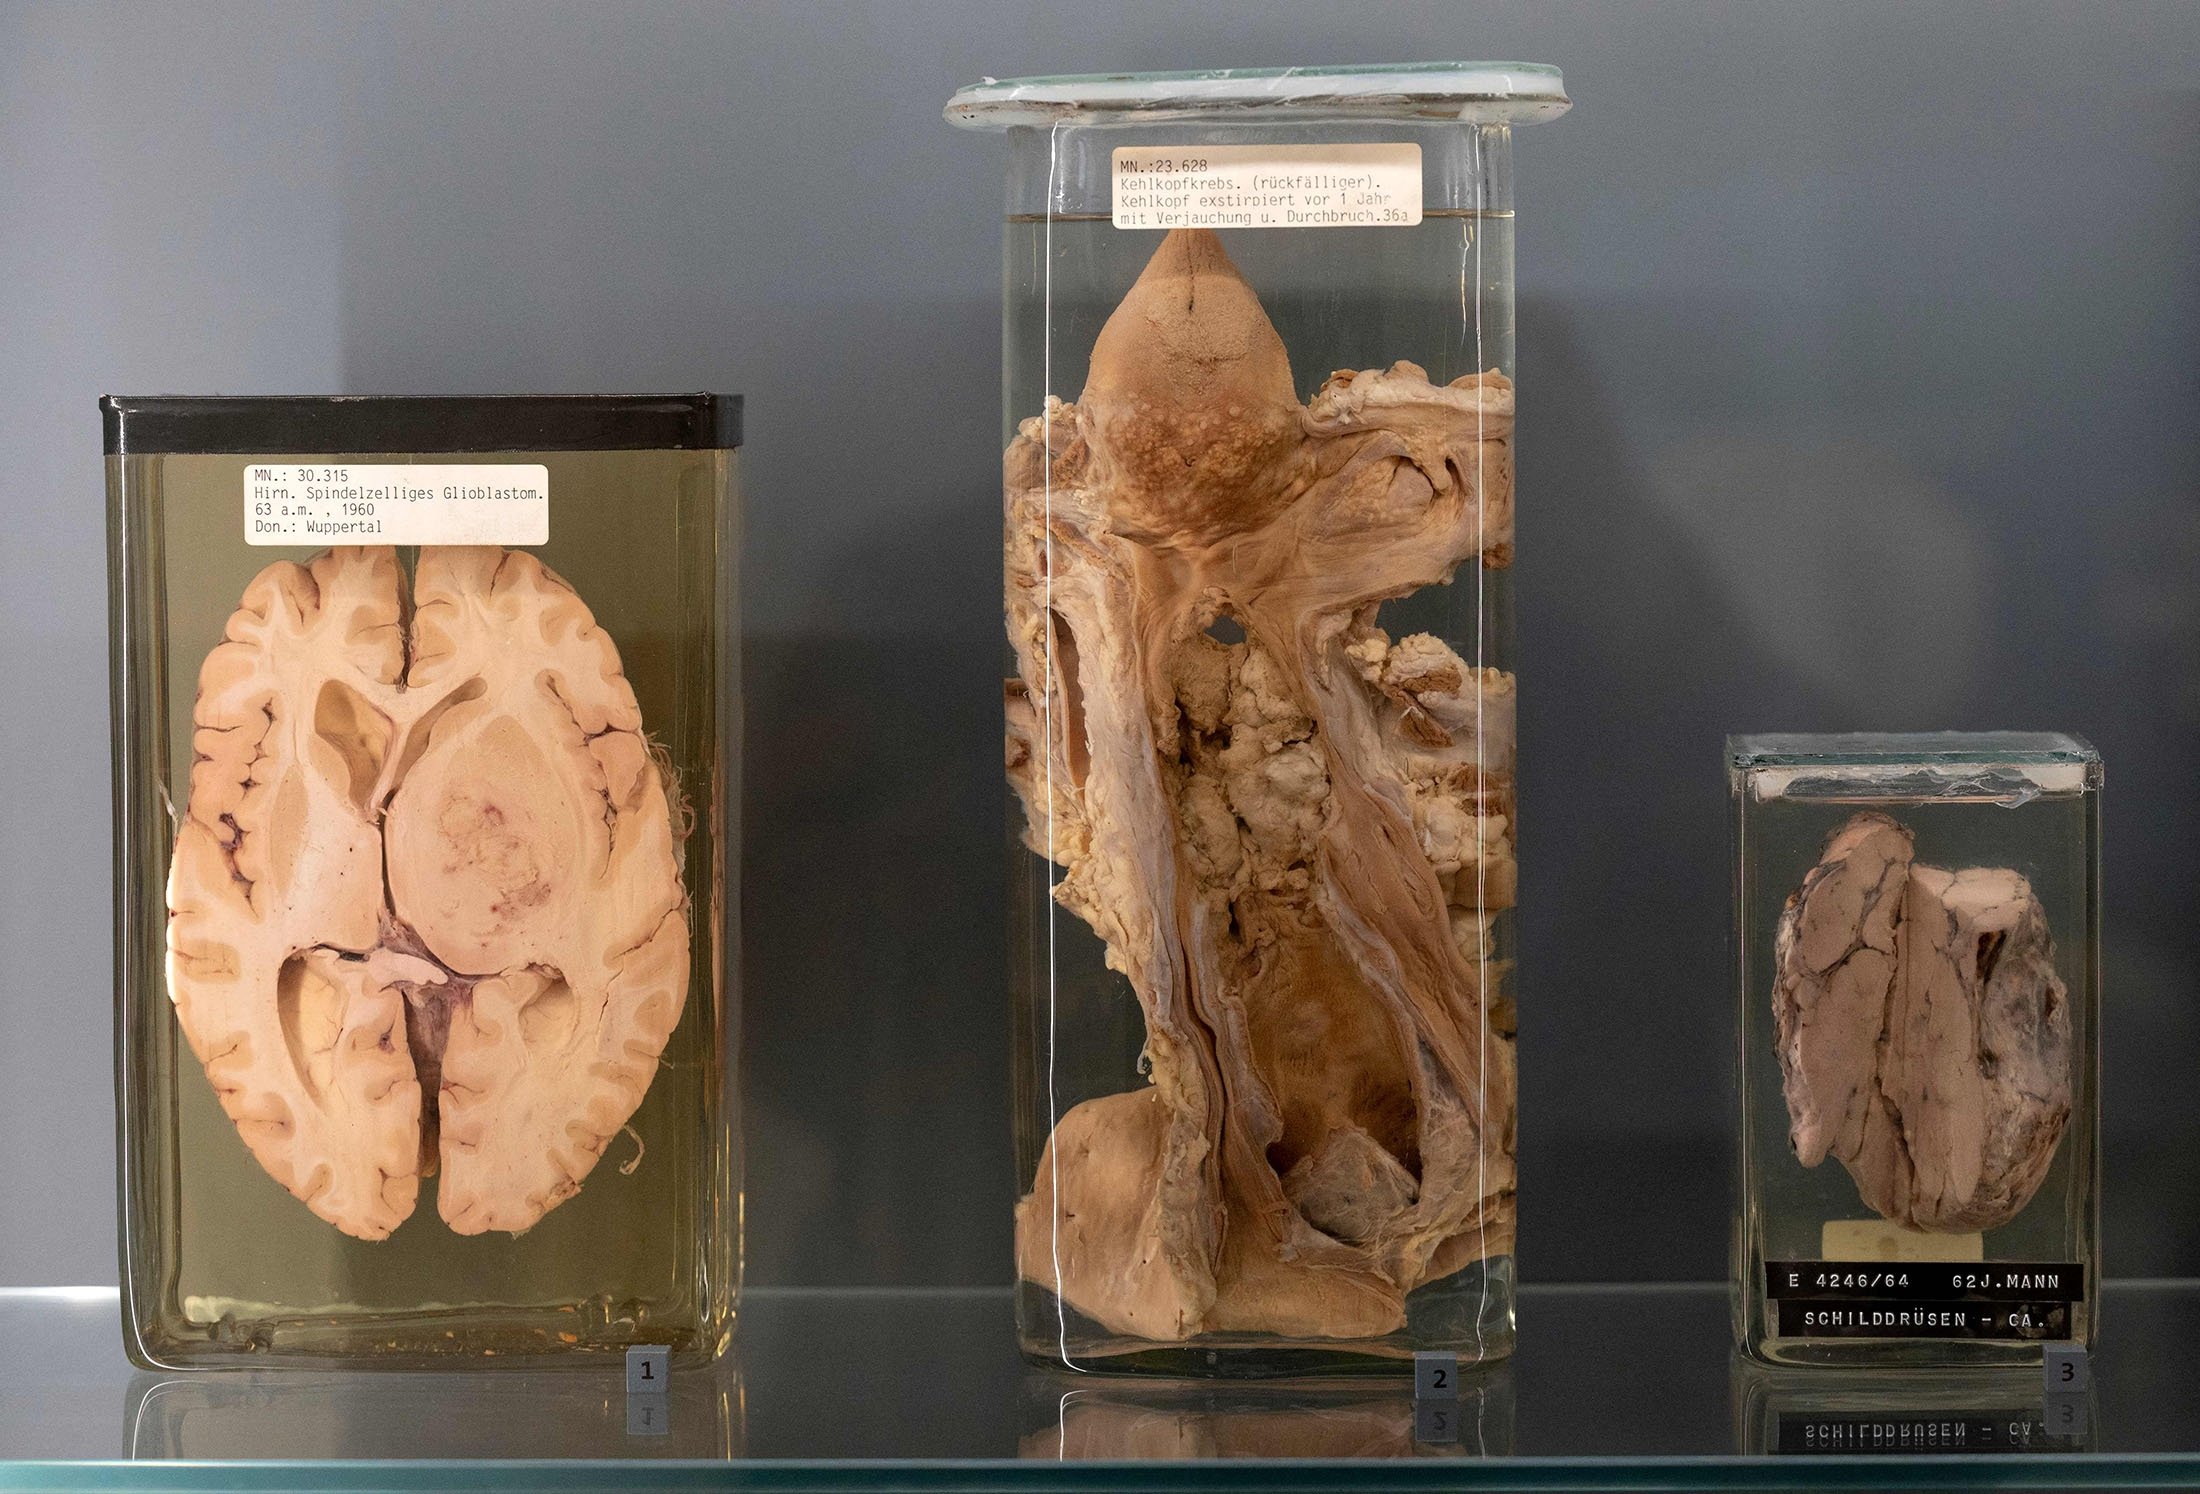 Exhibits of the anatomical pathology collection are displayed at Vienna's prestigious 'Narrenturm' Museum of Pathology in Vienna, Austria, on Oct. 20, 2021. (Photo by JOE KLAMAR / AFP)